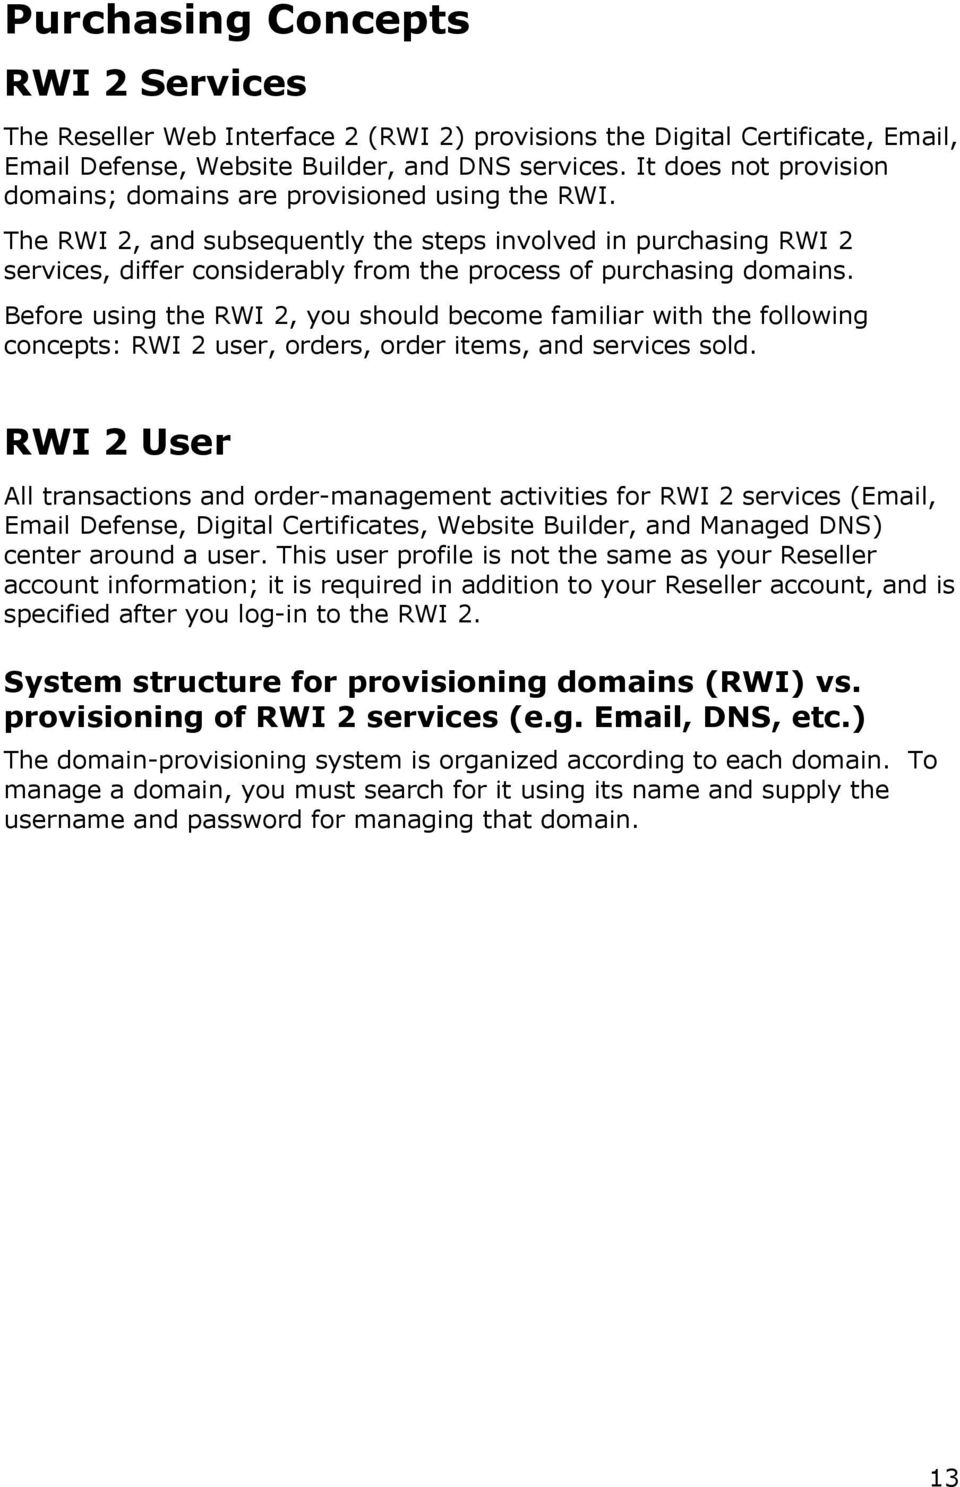 The RWI 2, and subsequently the steps involved in purchasing RWI 2 services, differ considerably from the process of purchasing domains.